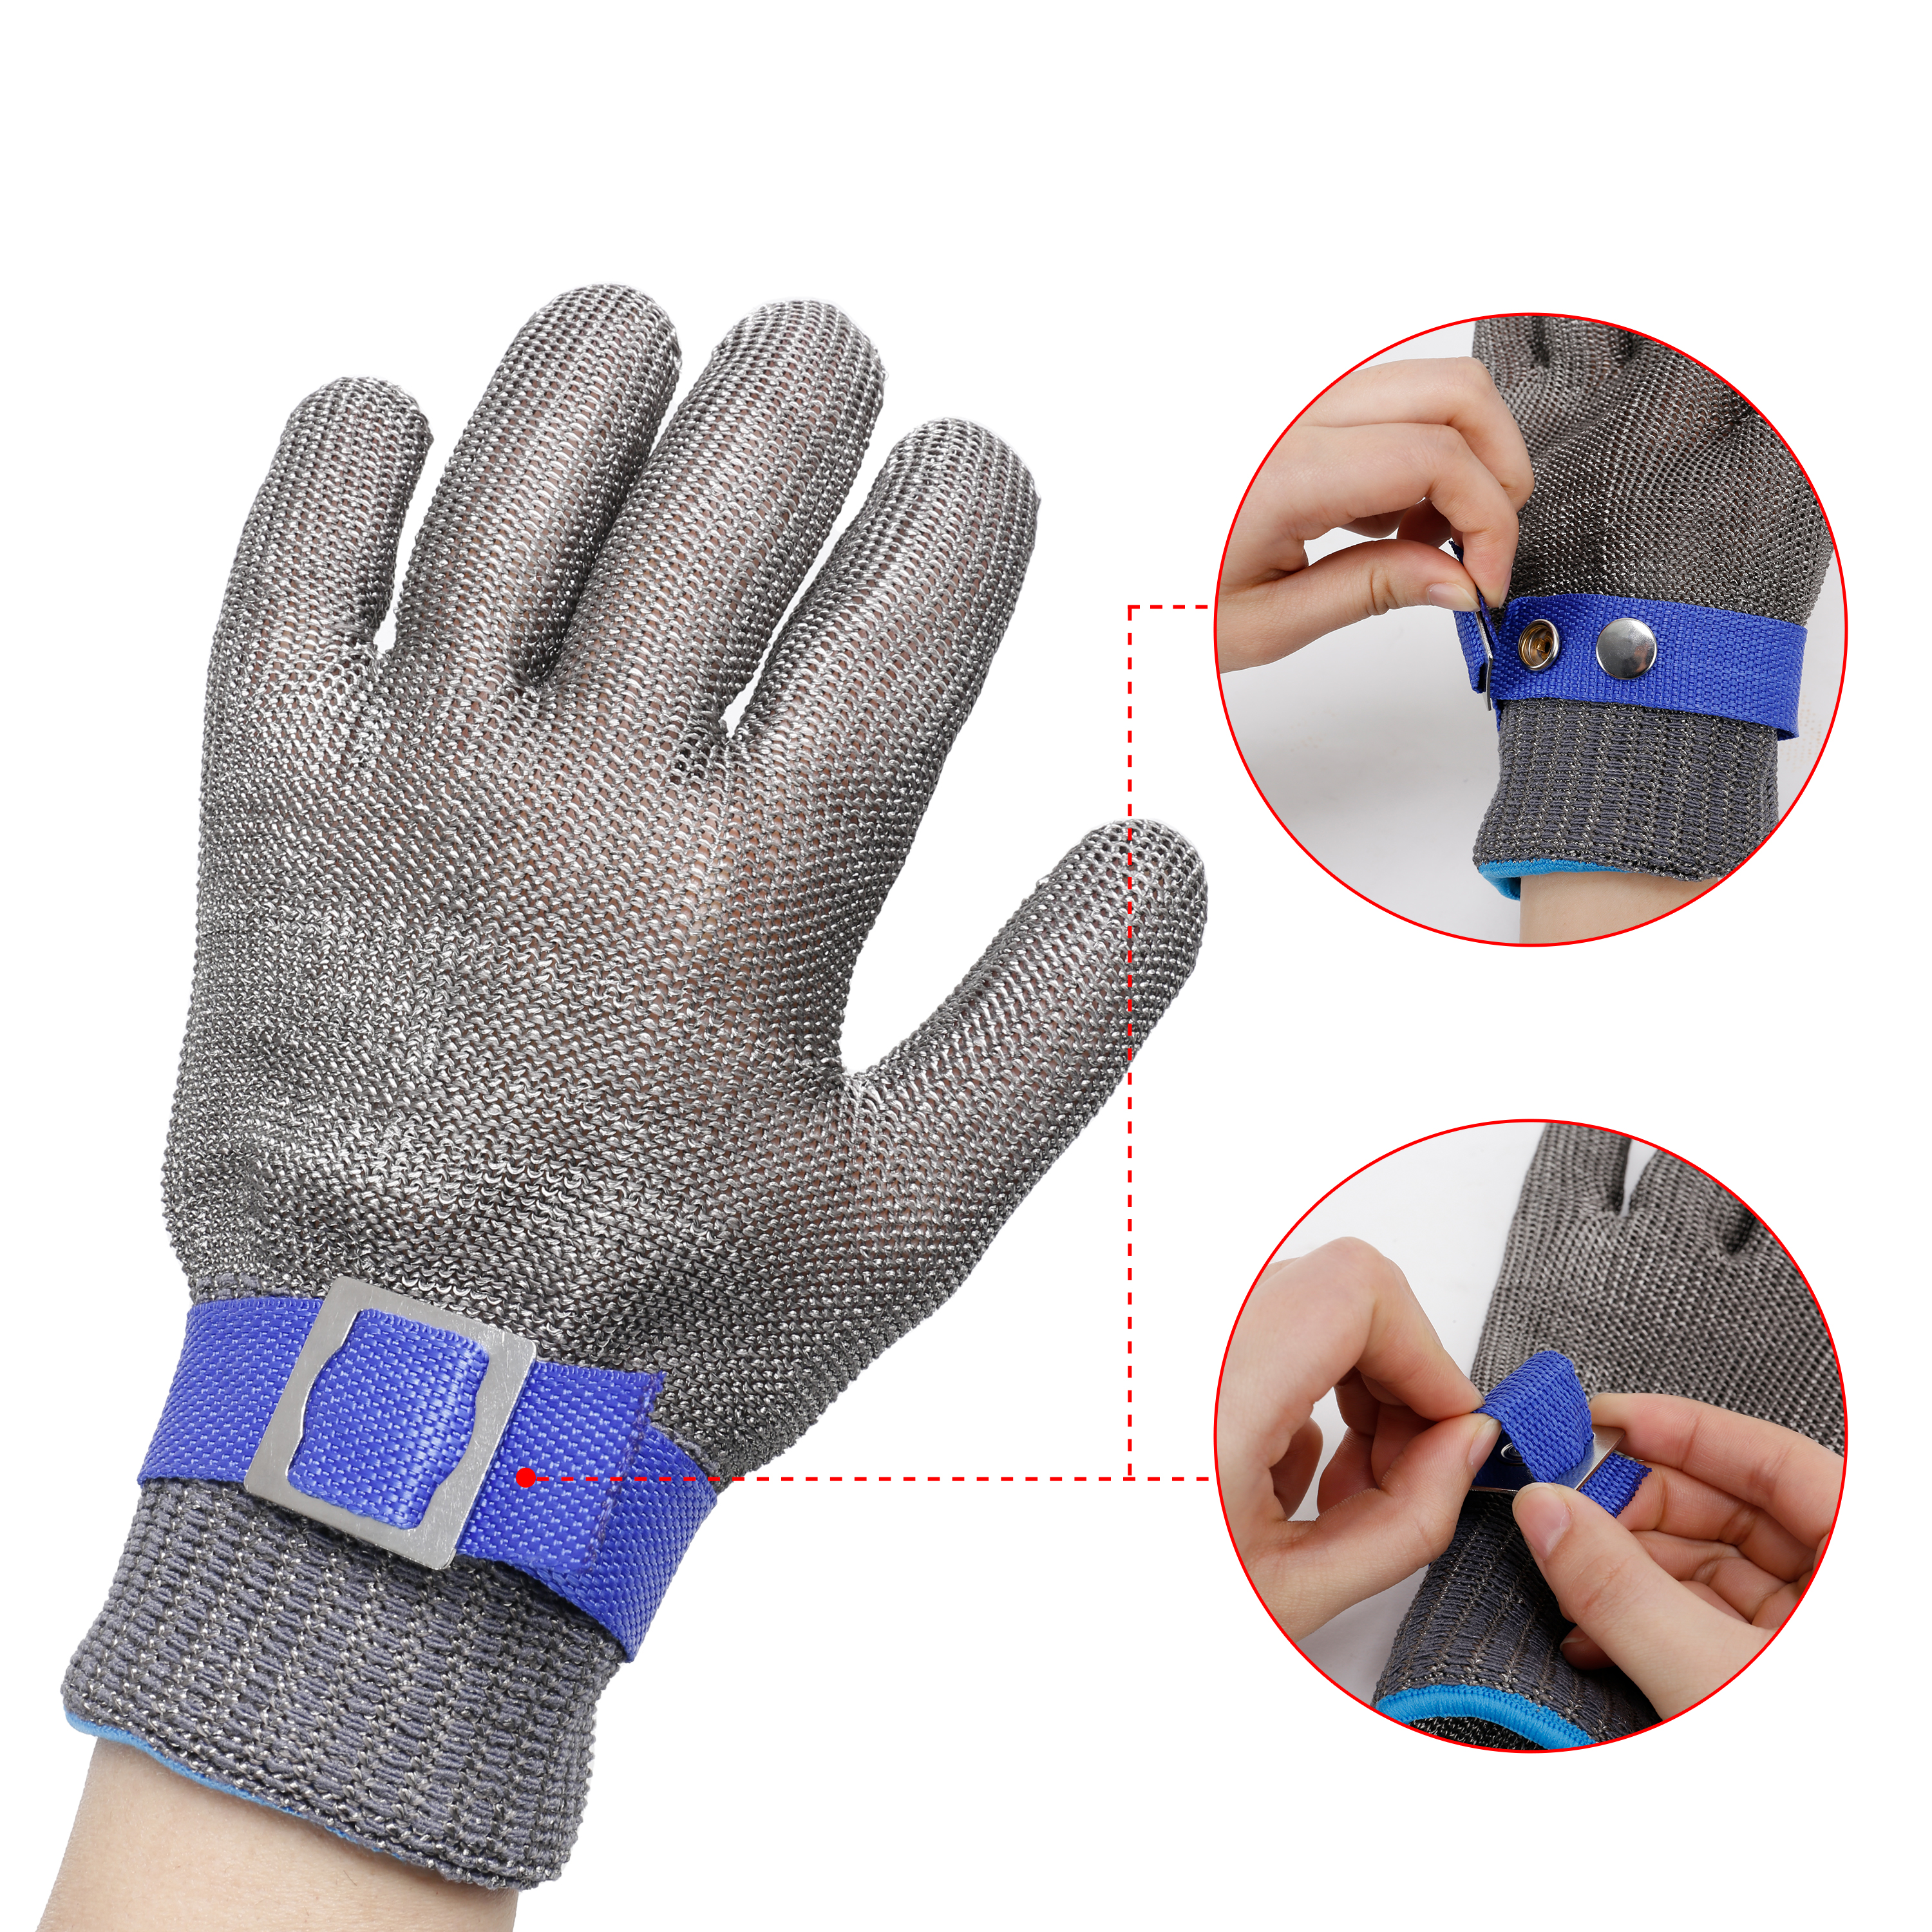 Level 9 Cut Resistant Gloves Stainless Steel Mesh Metal Glove Safety Work  Glove,Home Decoration